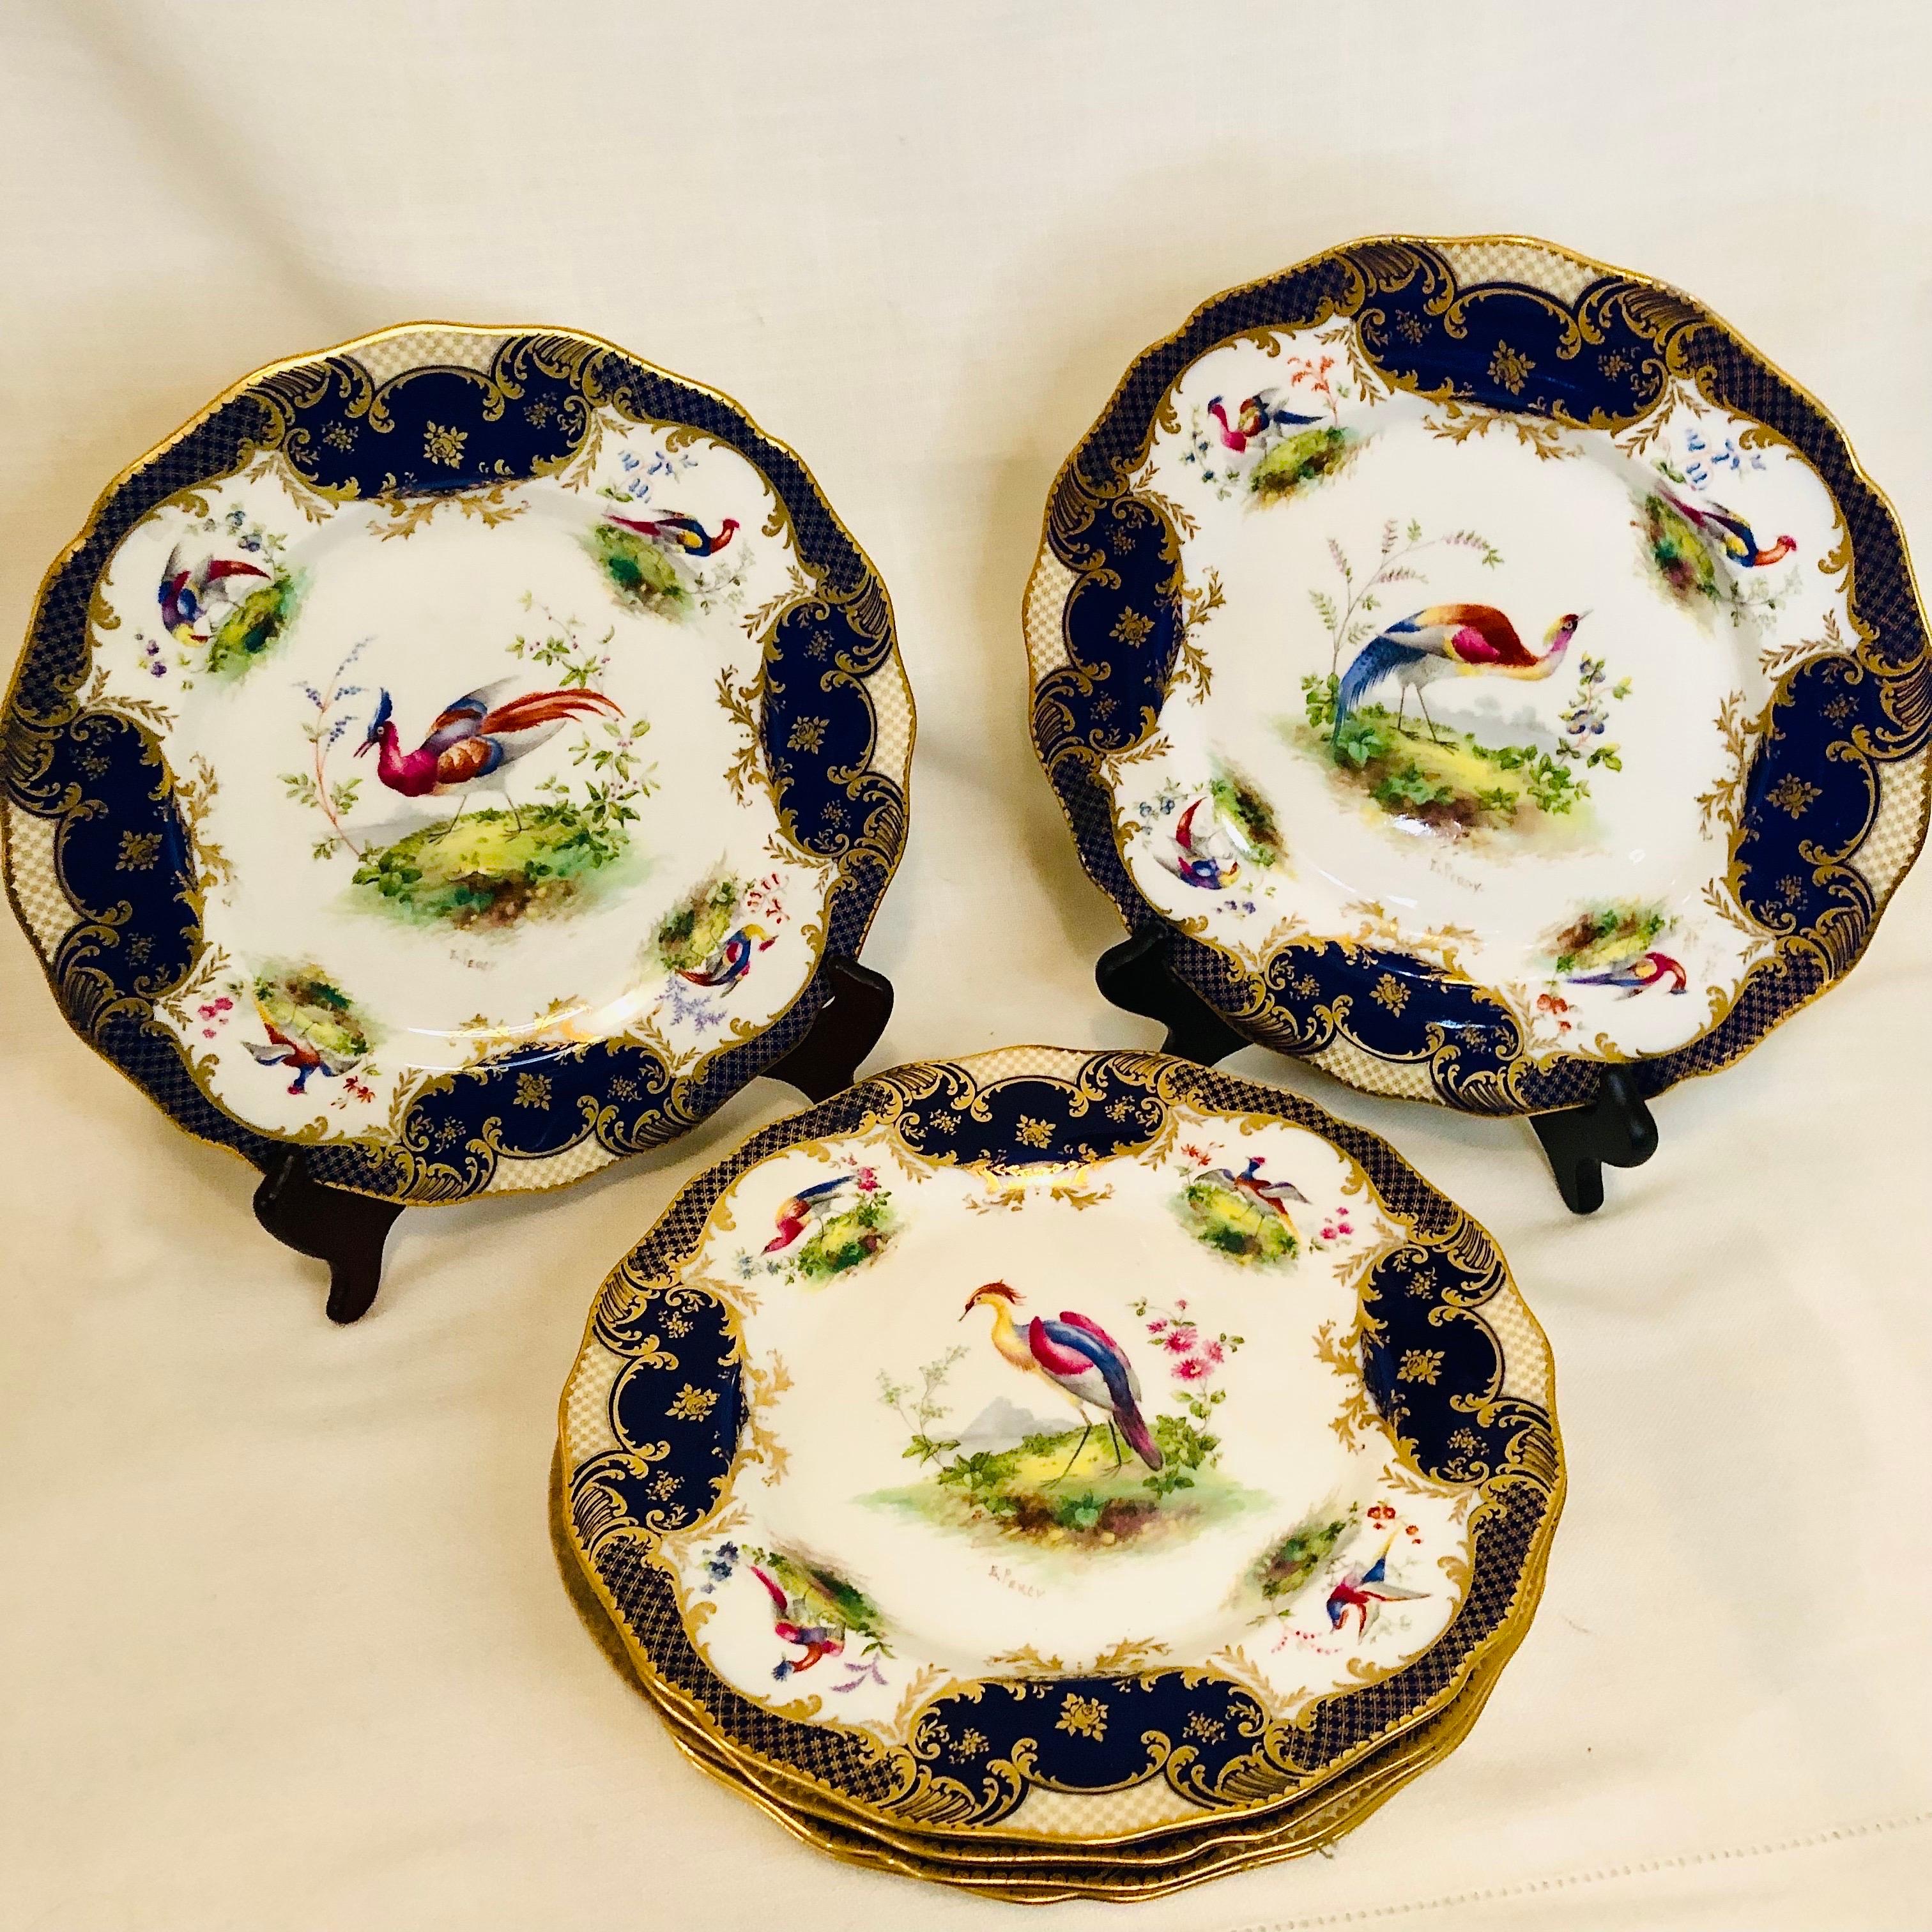 This is a fabulous set of six Royal Doulton dinner plates that were exclusively made for Tiffany and Company in New York. Each plate has a large exotic bird in the center and four cartouches of birds and flowers on a white ground inside the